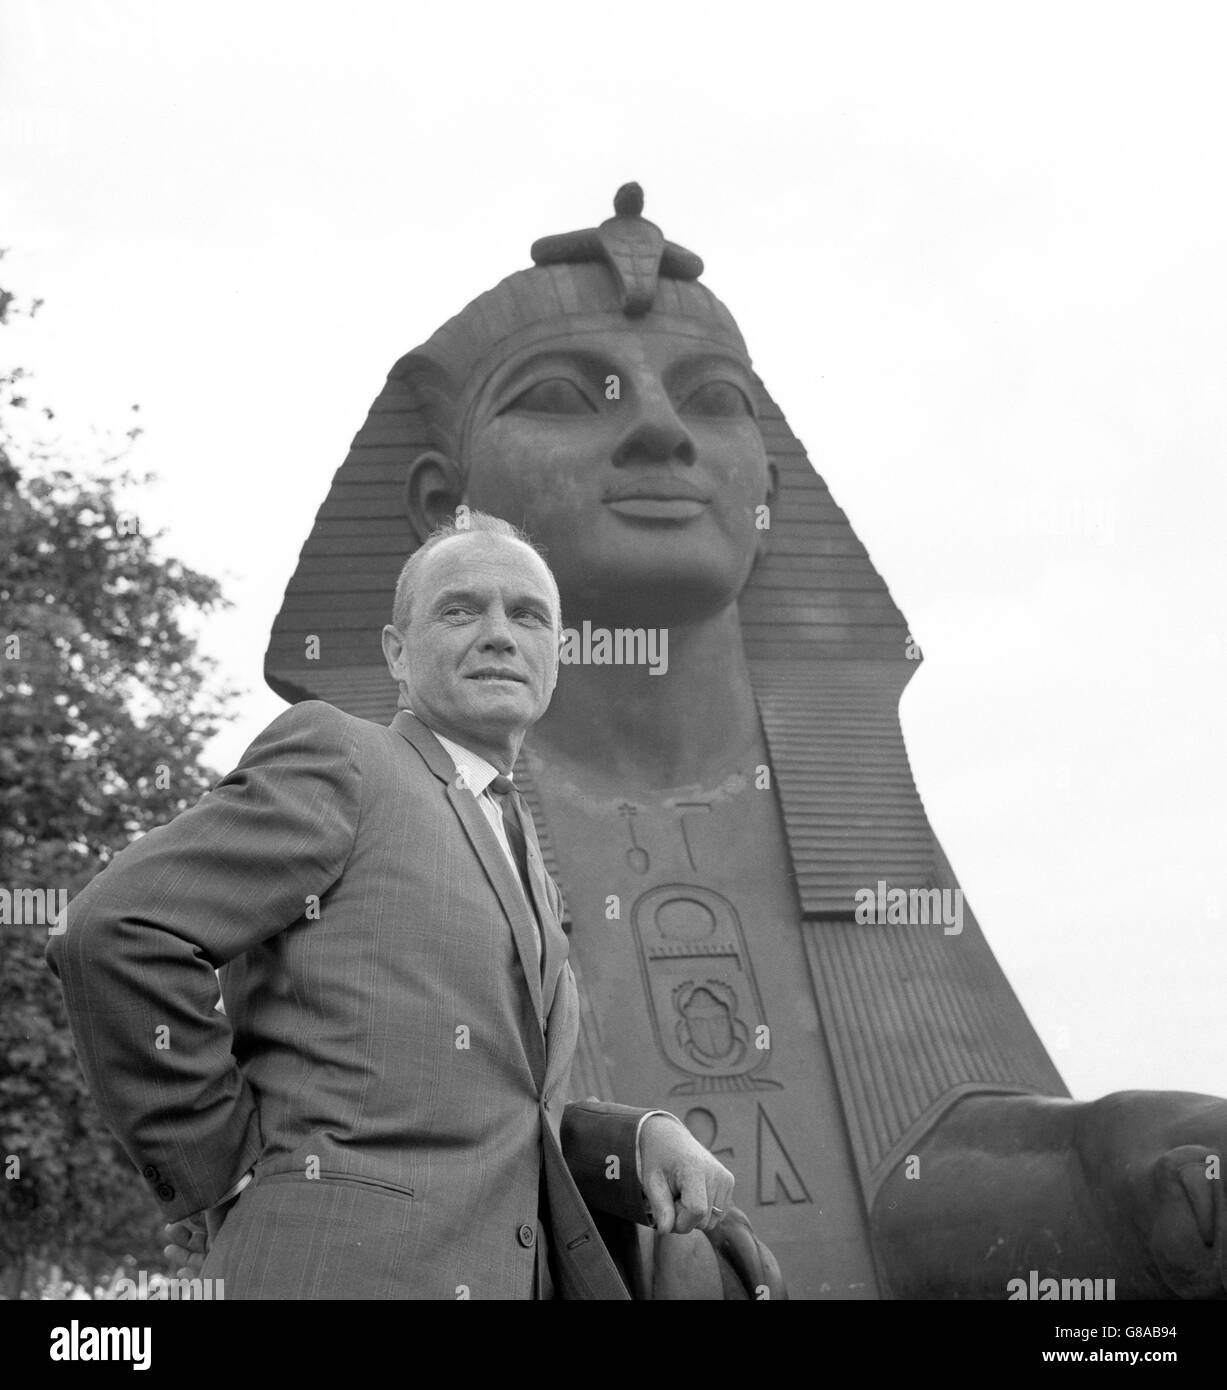 A pioneer of the Space Age meets an ancient-world landmark on the Victoria Embankment in London. Astronaut Colonel John H. Glenn Jr, the first American to make an orbital space flight, is pictured with one of the sphinxes at Cleopatra's Needle. Col. Glenn is visiting Britain during a short European tour. Stock Photo